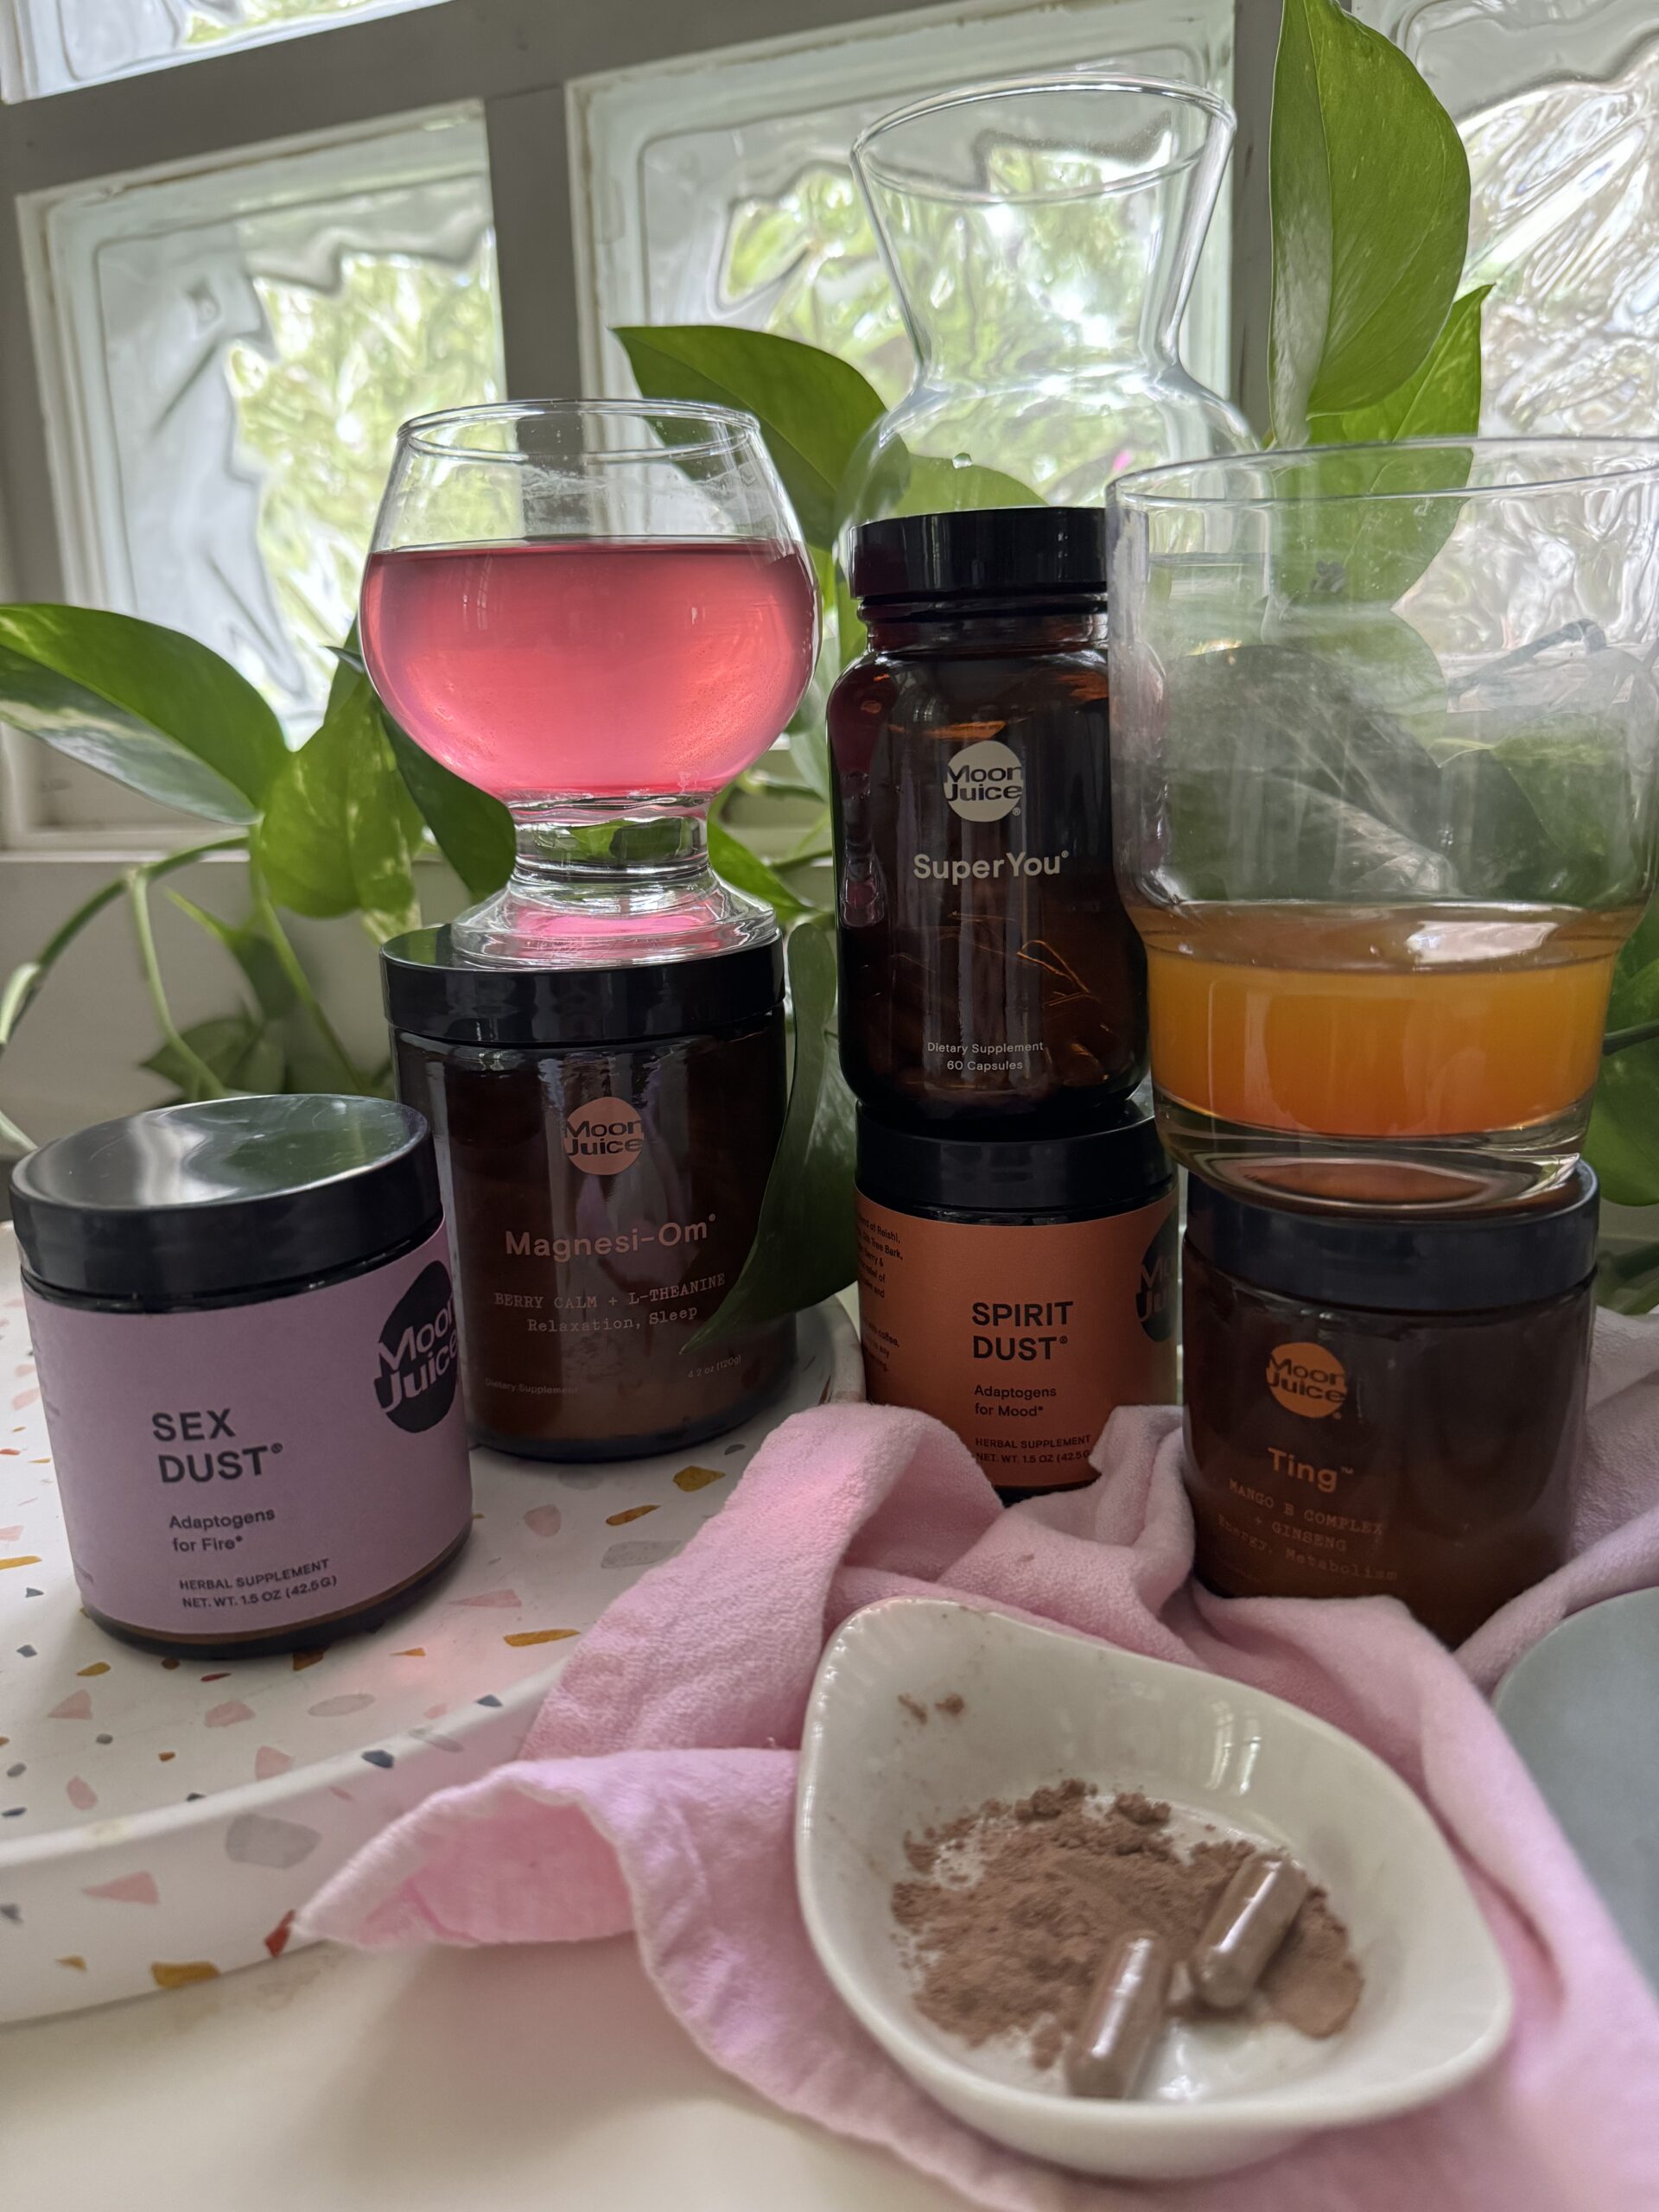 A kitchen counter with a glass of pink liquid, various wellness supplements in jars, and a spoonful of powder on a pink cloth.